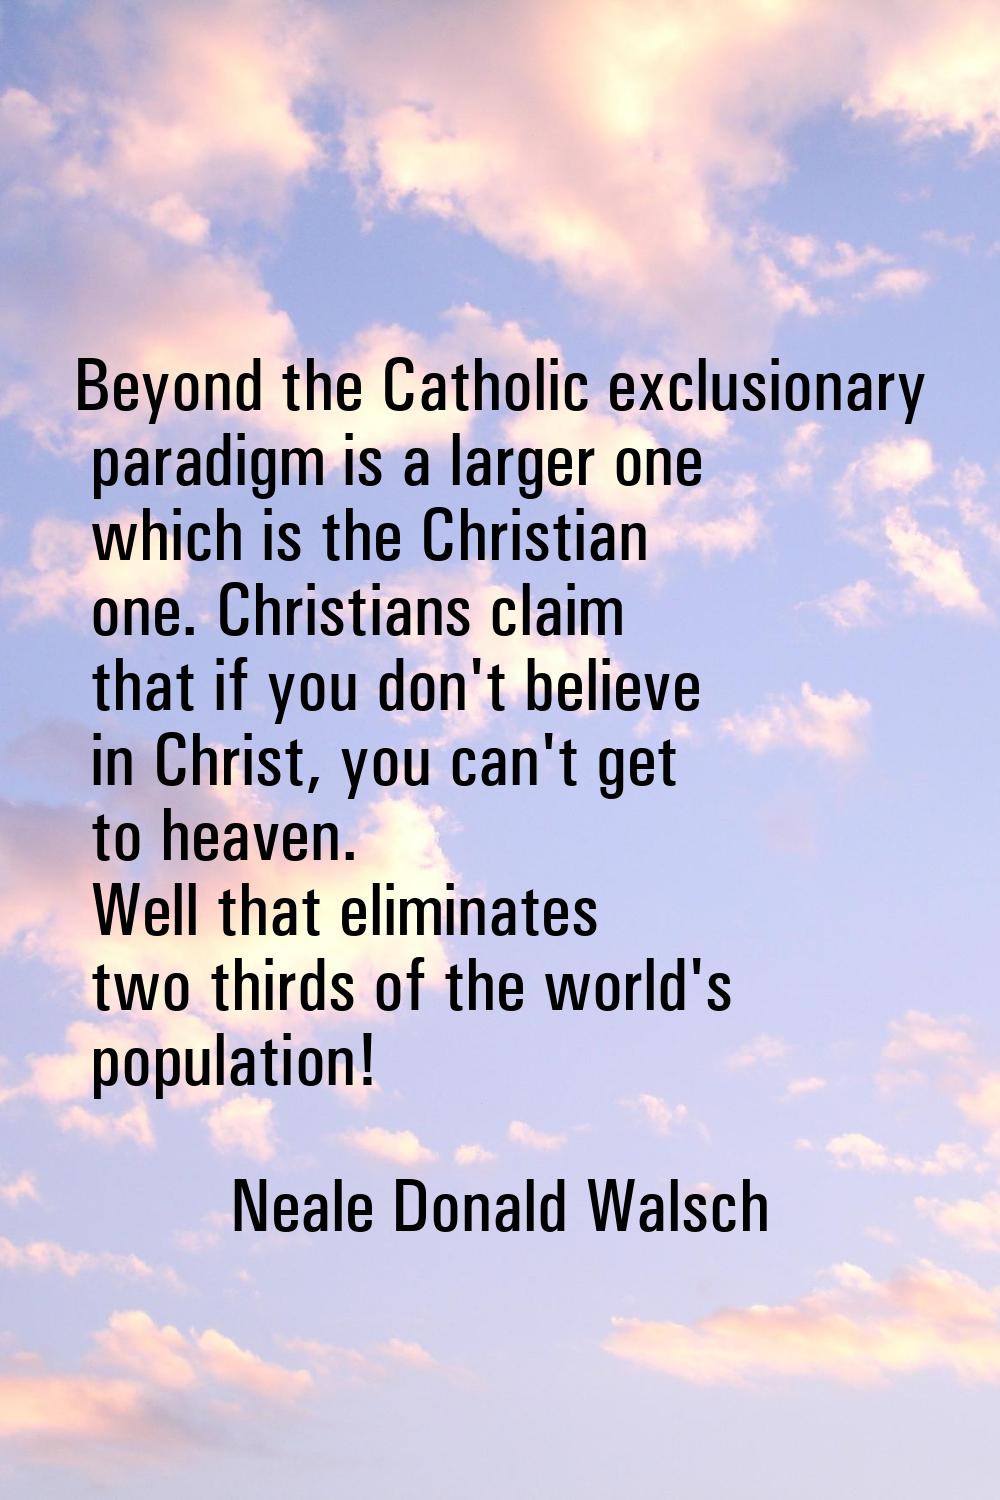 Beyond the Catholic exclusionary paradigm is a larger one which is the Christian one. Christians cl